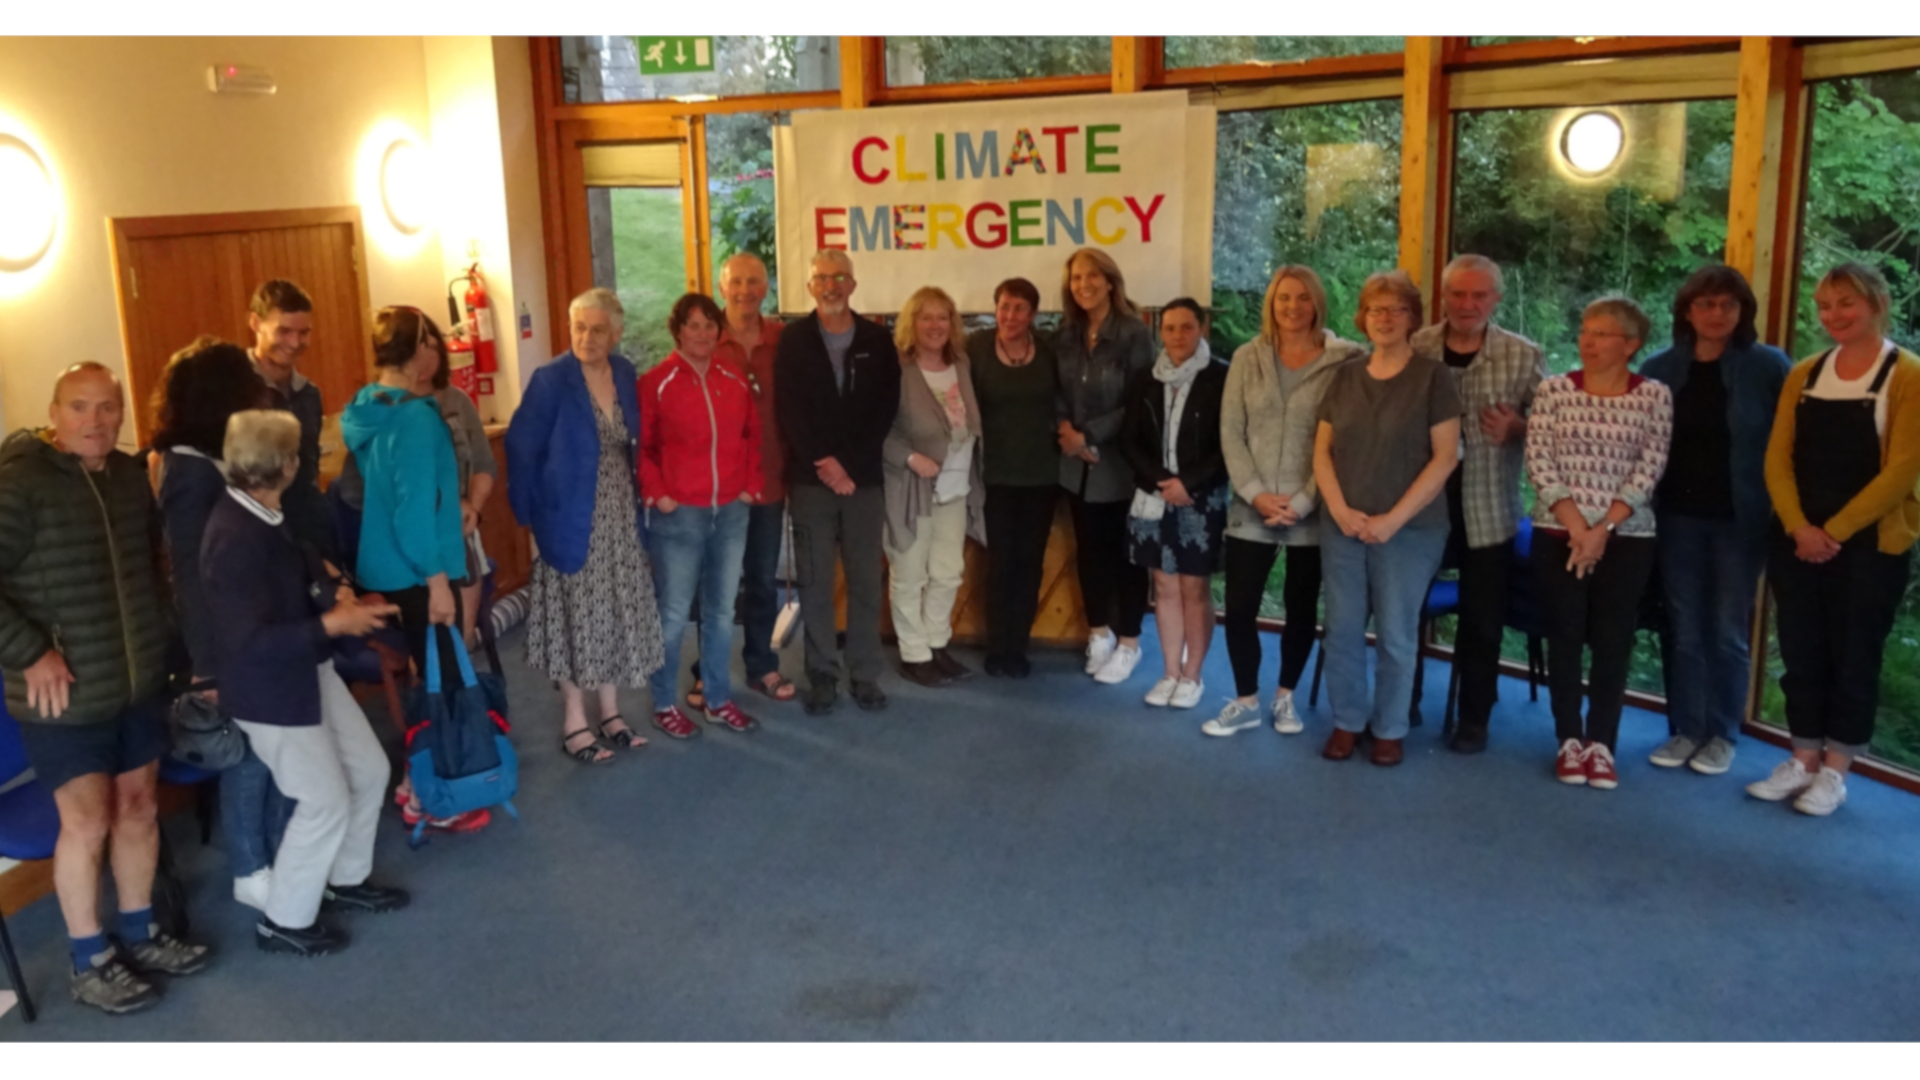 Members of the Amblesize to Zero group, part of Ambleside Action for a Future, following the announcement of support from South Lakeland District Council for their goal to cut carbon emissions in the town